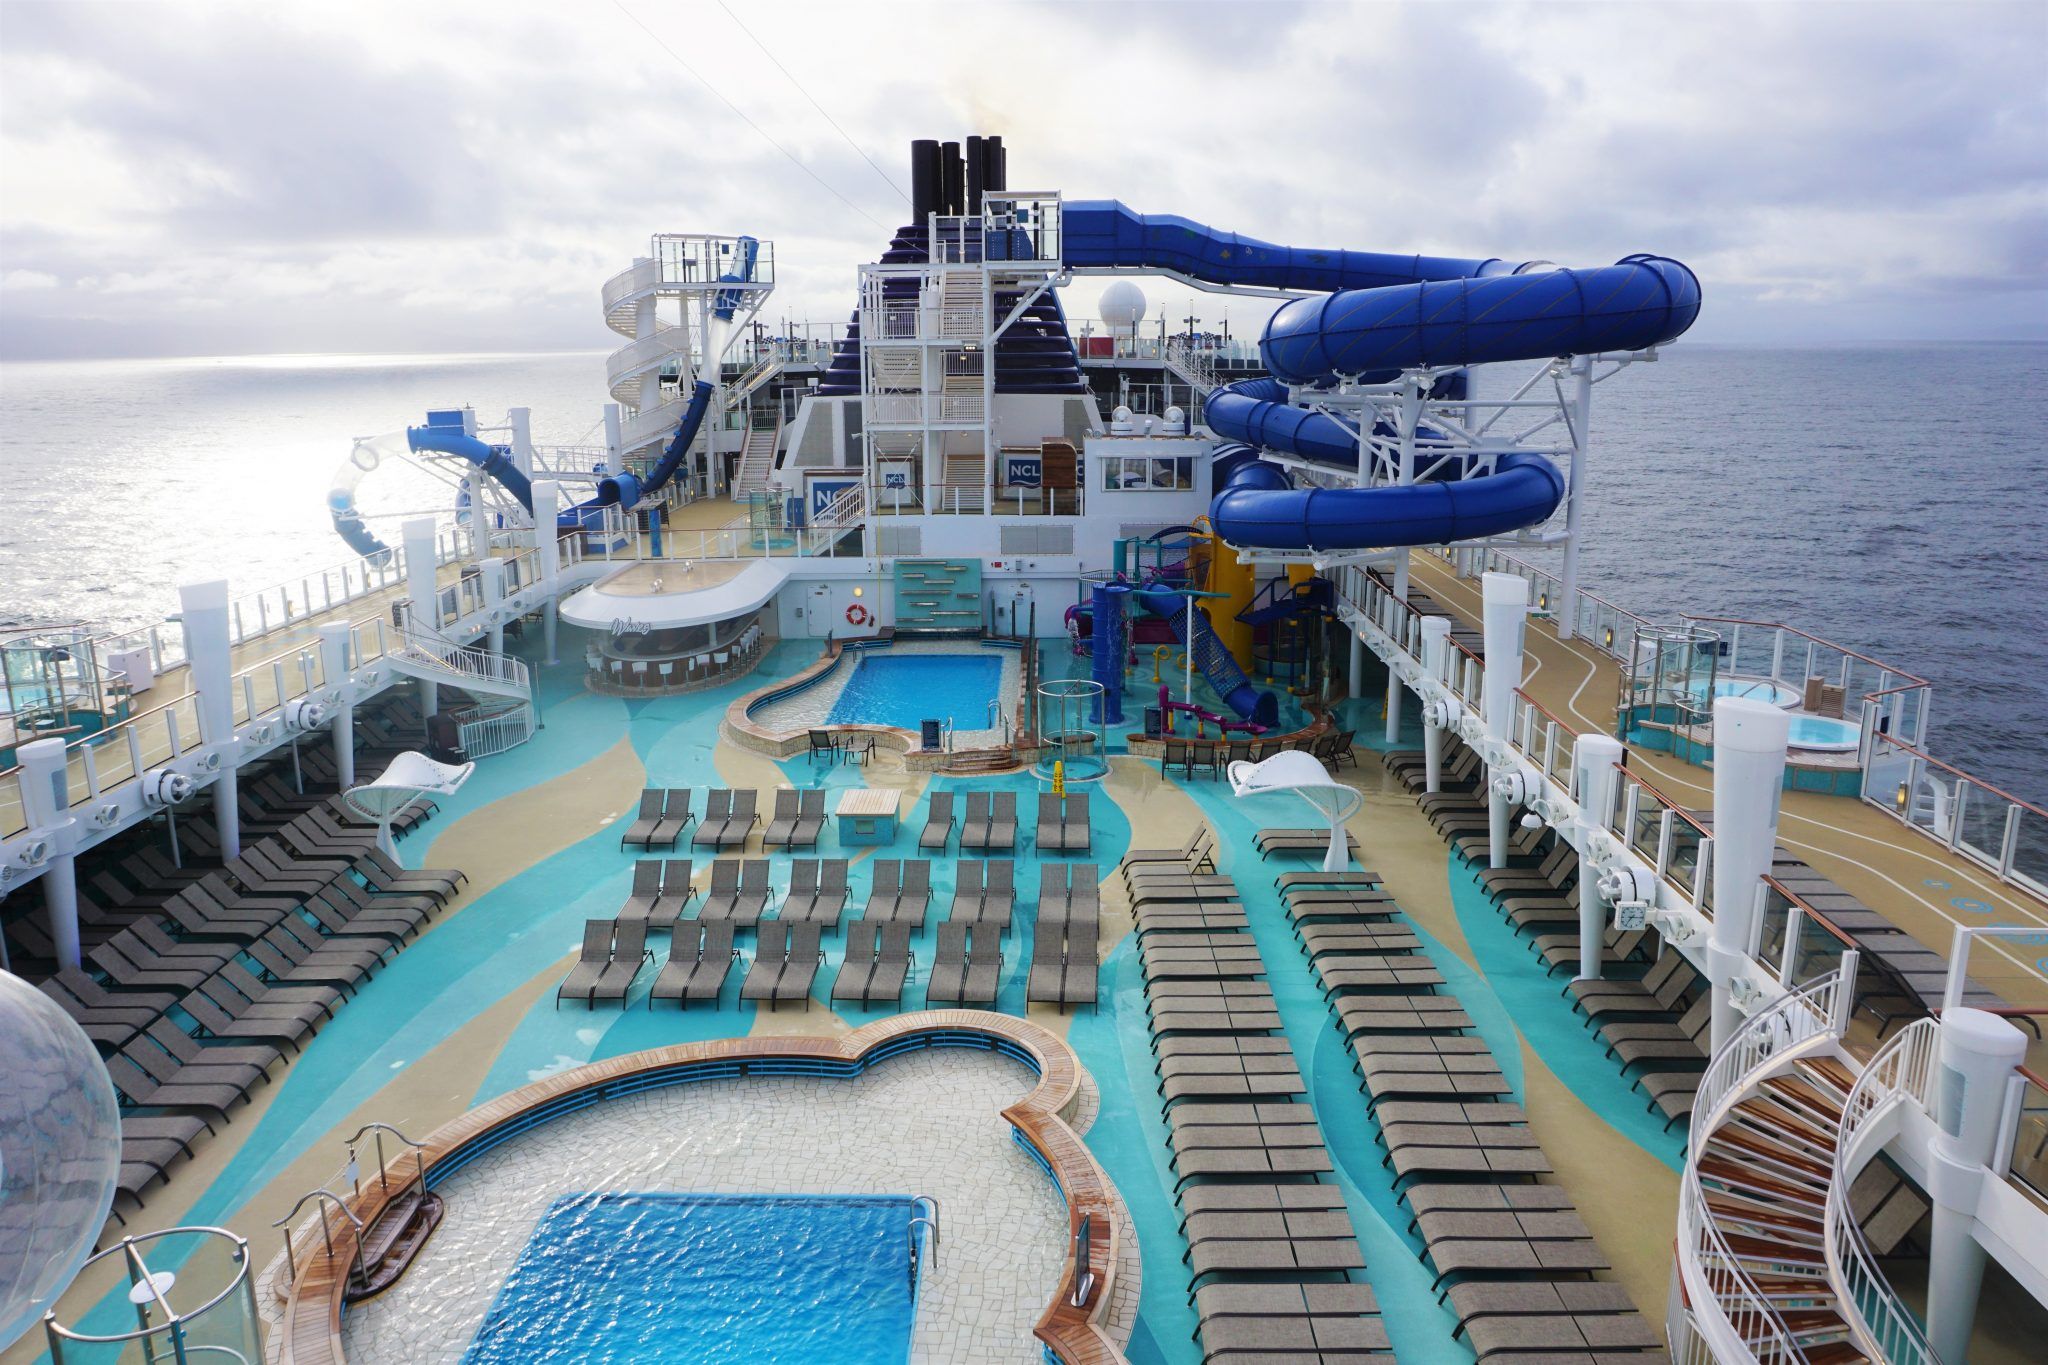 What's Included on Norwegian Cruise Line